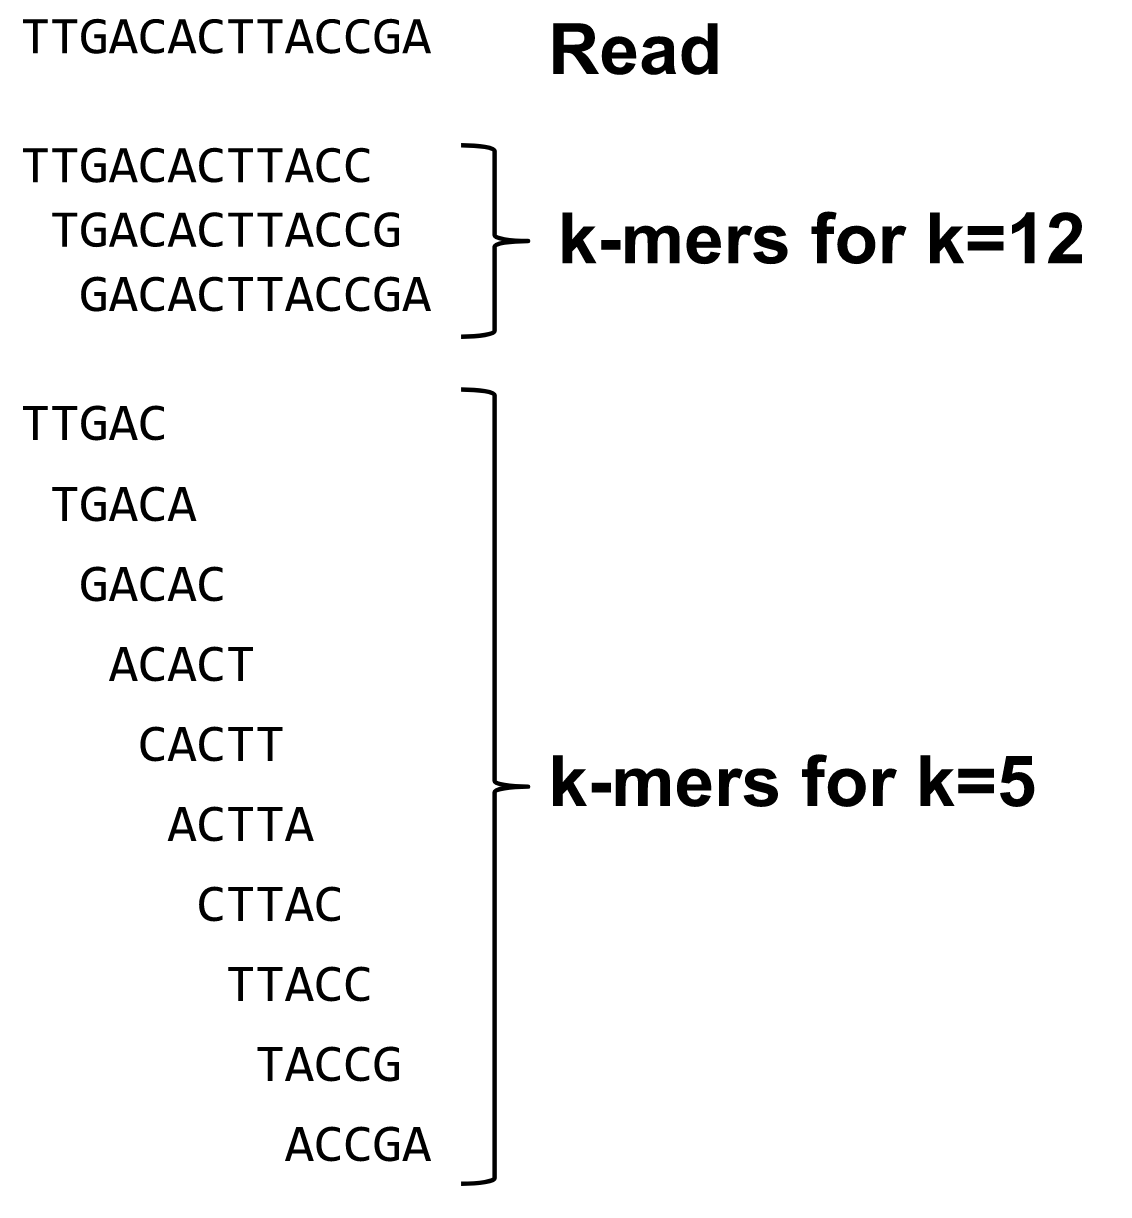 K-mers are subwords of length k of a string